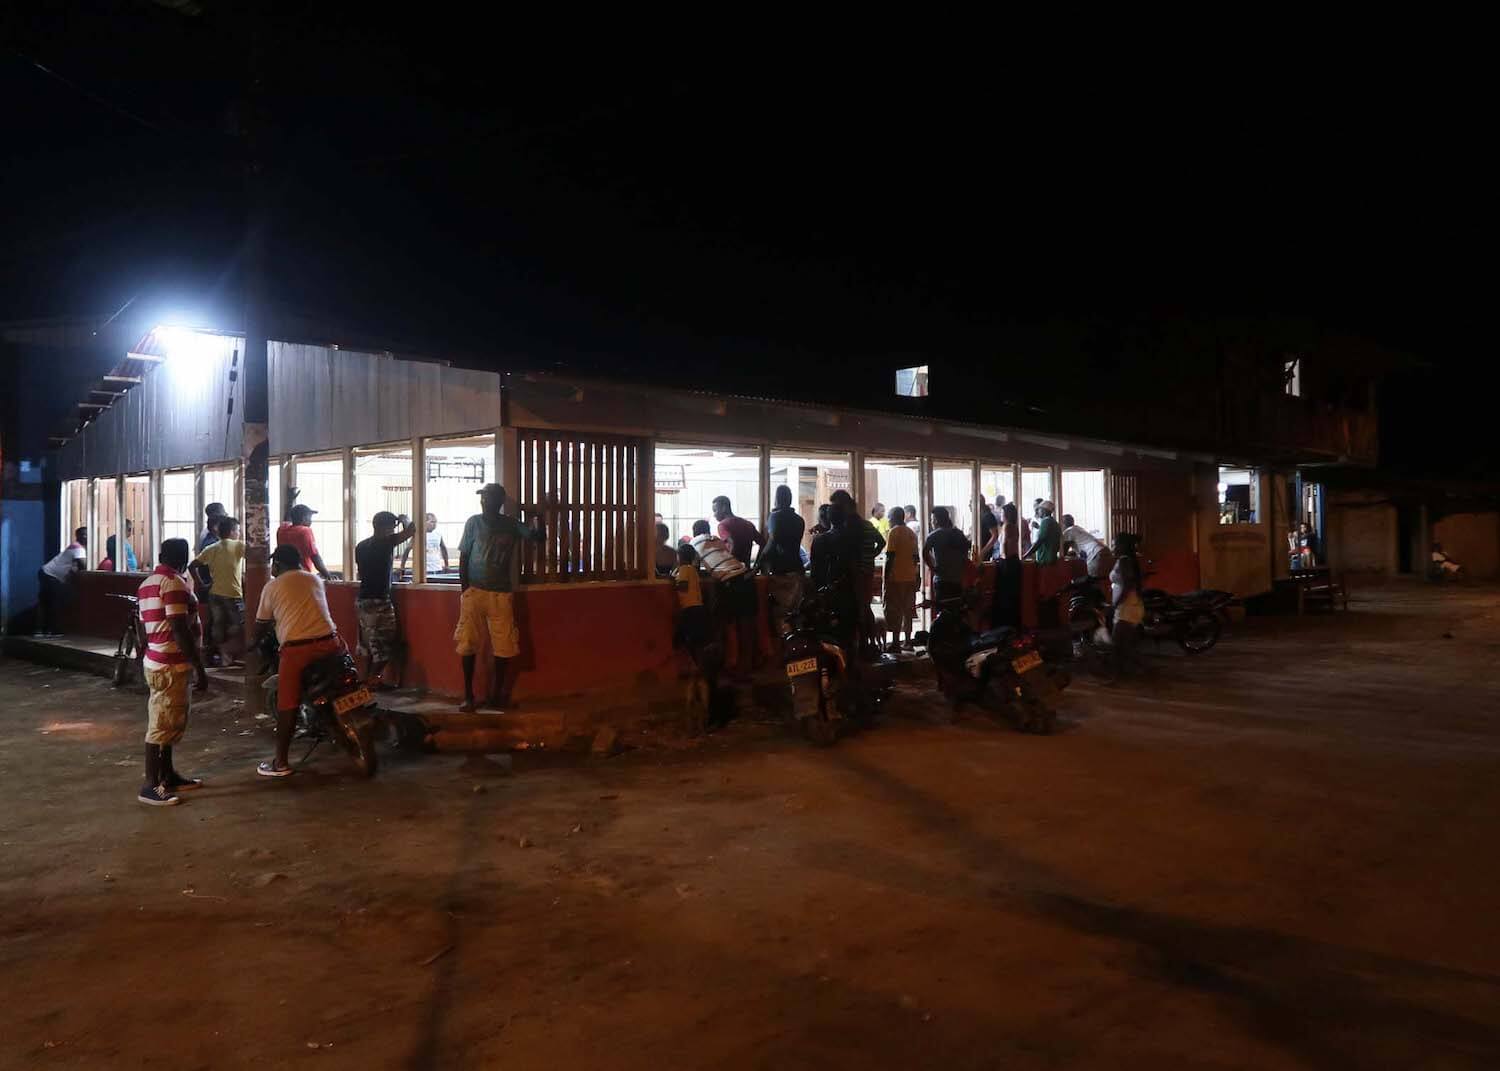 Spectators crowding outside El Valle's pool hall, the top thing to do in El Valle at night.